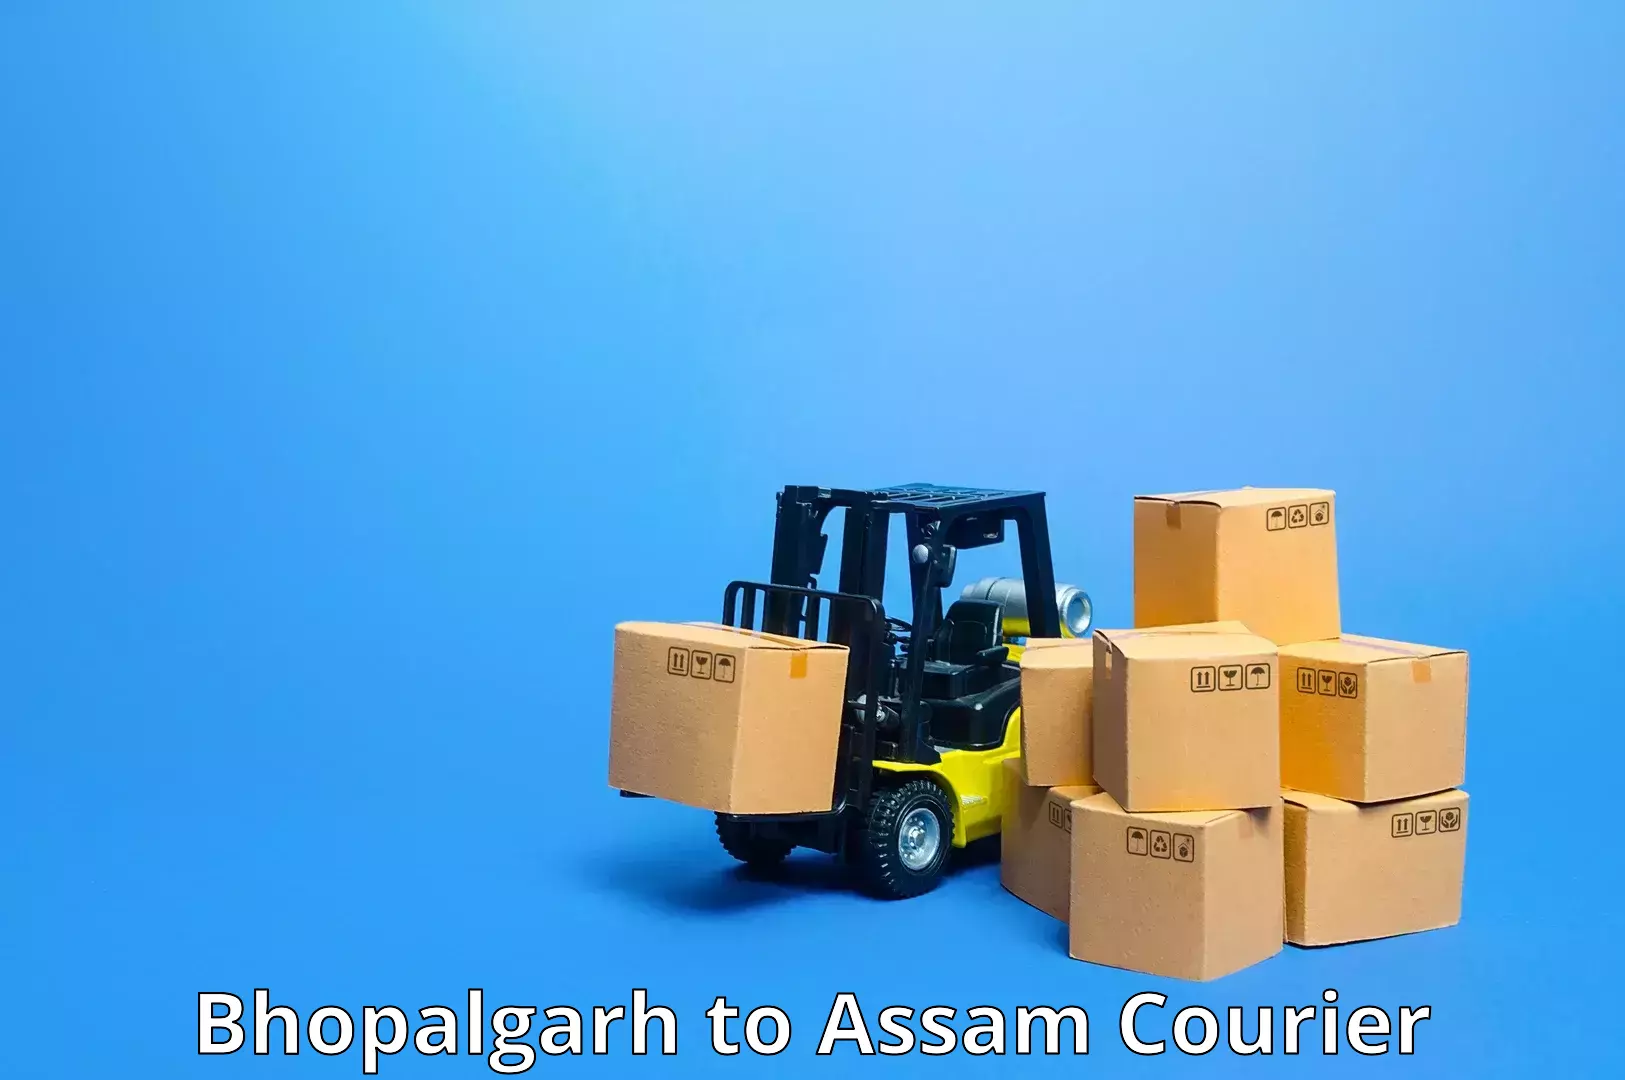 State-of-the-art courier technology Bhopalgarh to Hajo